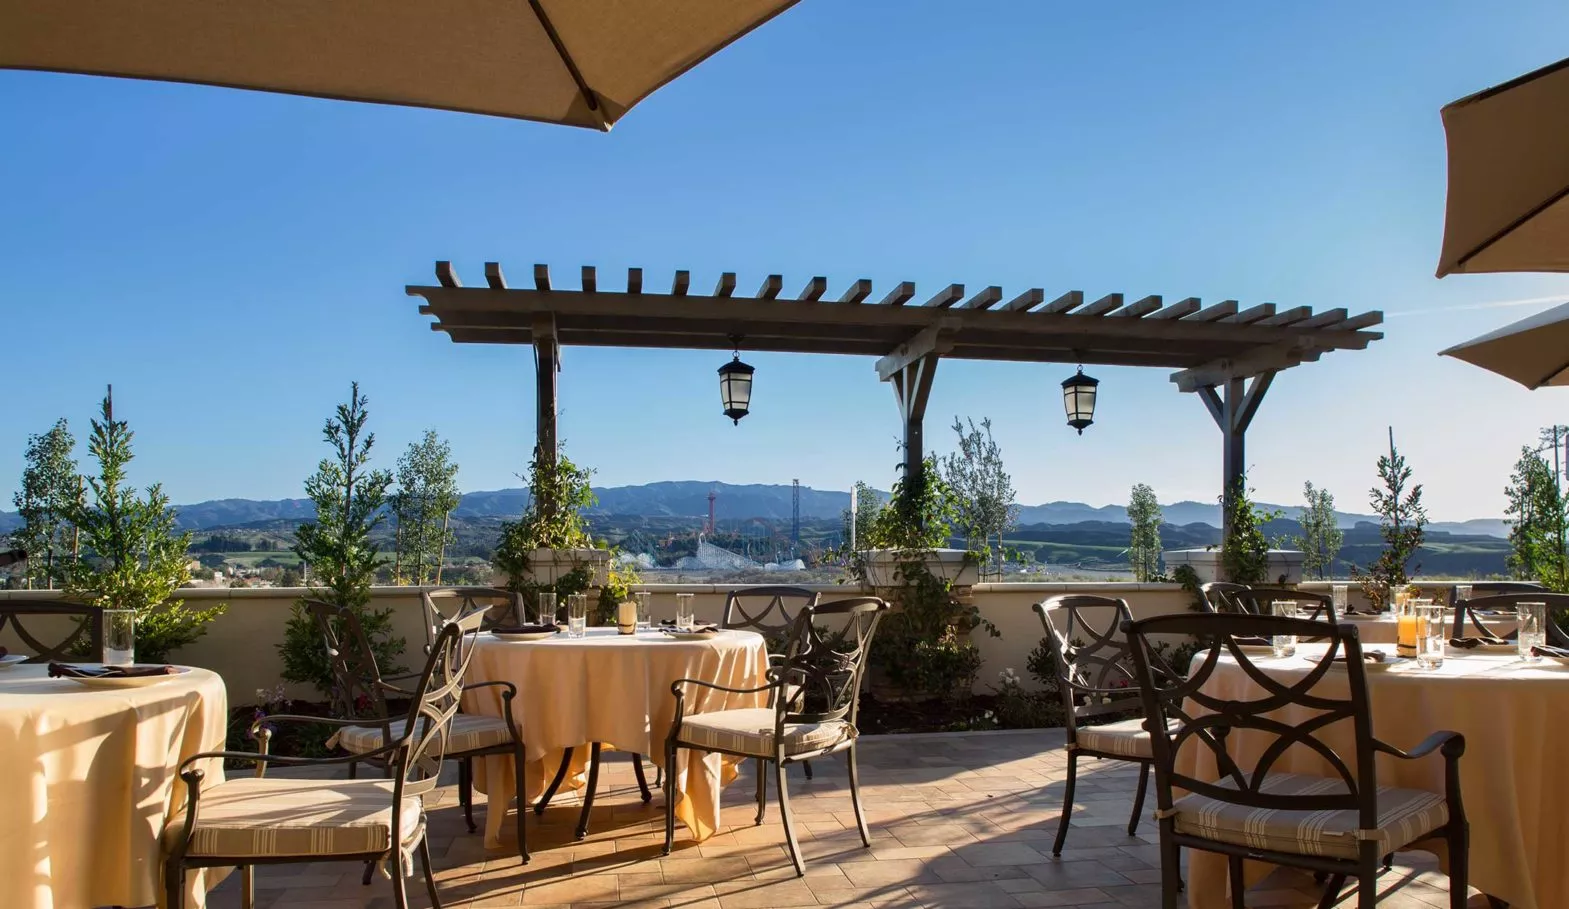 Santa Clarita patio with view and dining tables